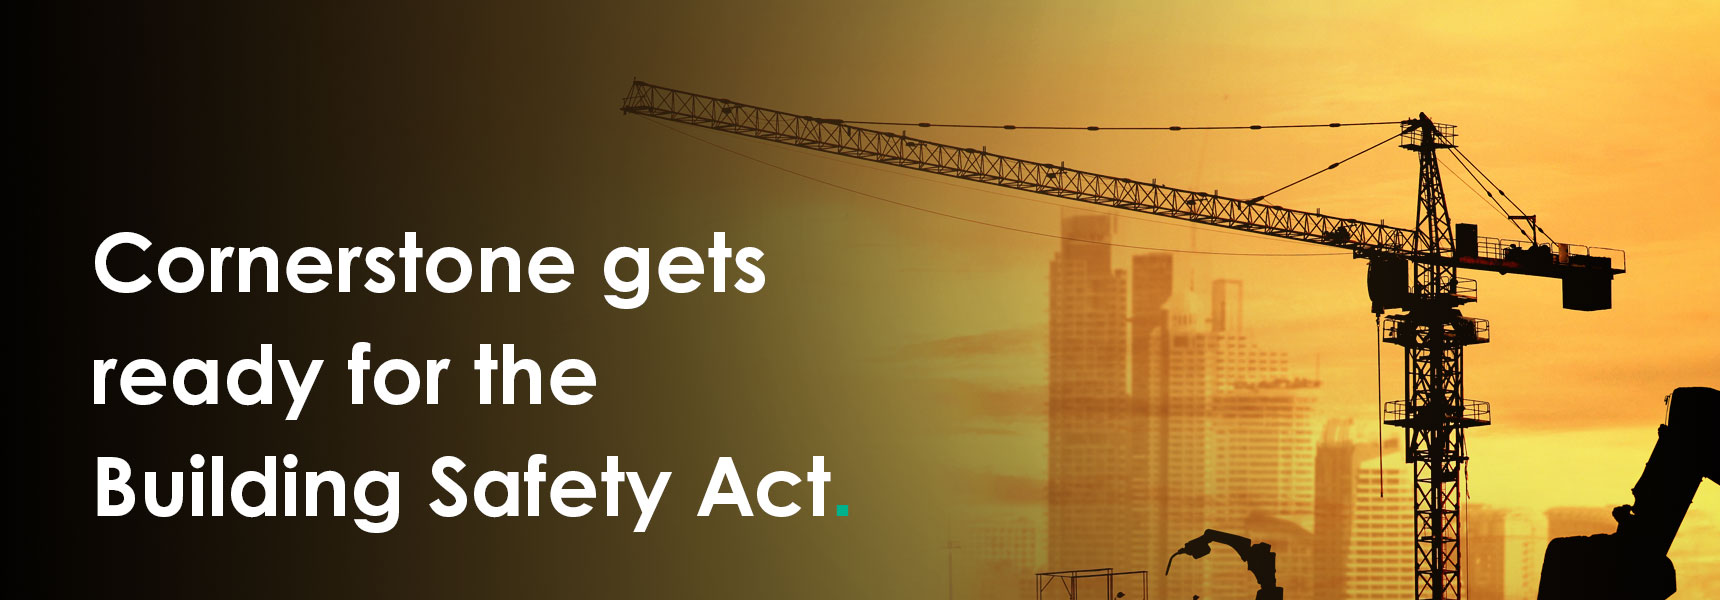 Cornerstone gets ready for the Building Safety Act